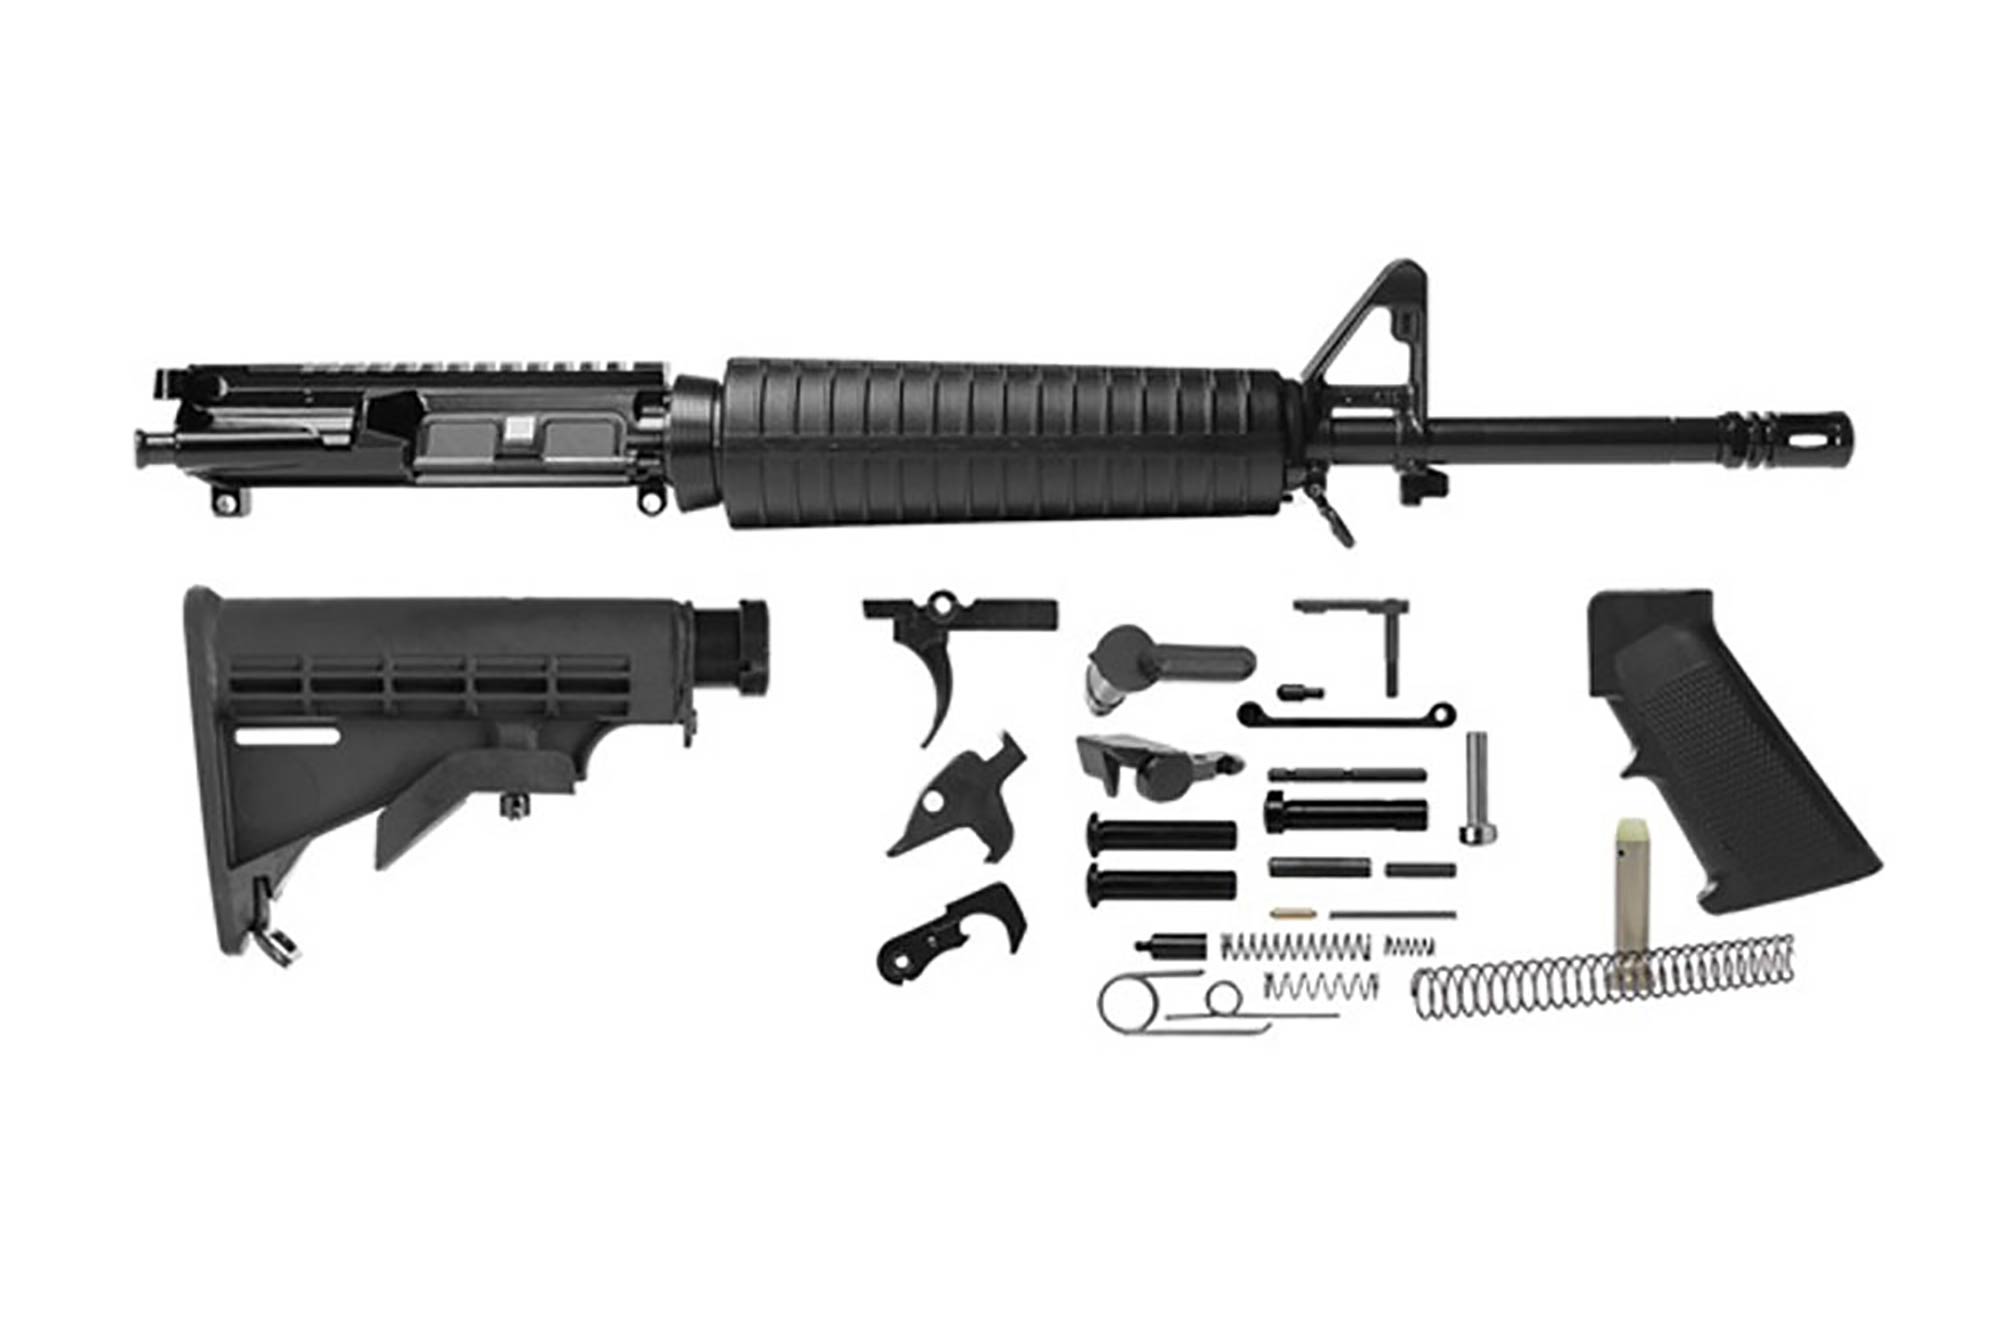 Parts For Your Very Own AR